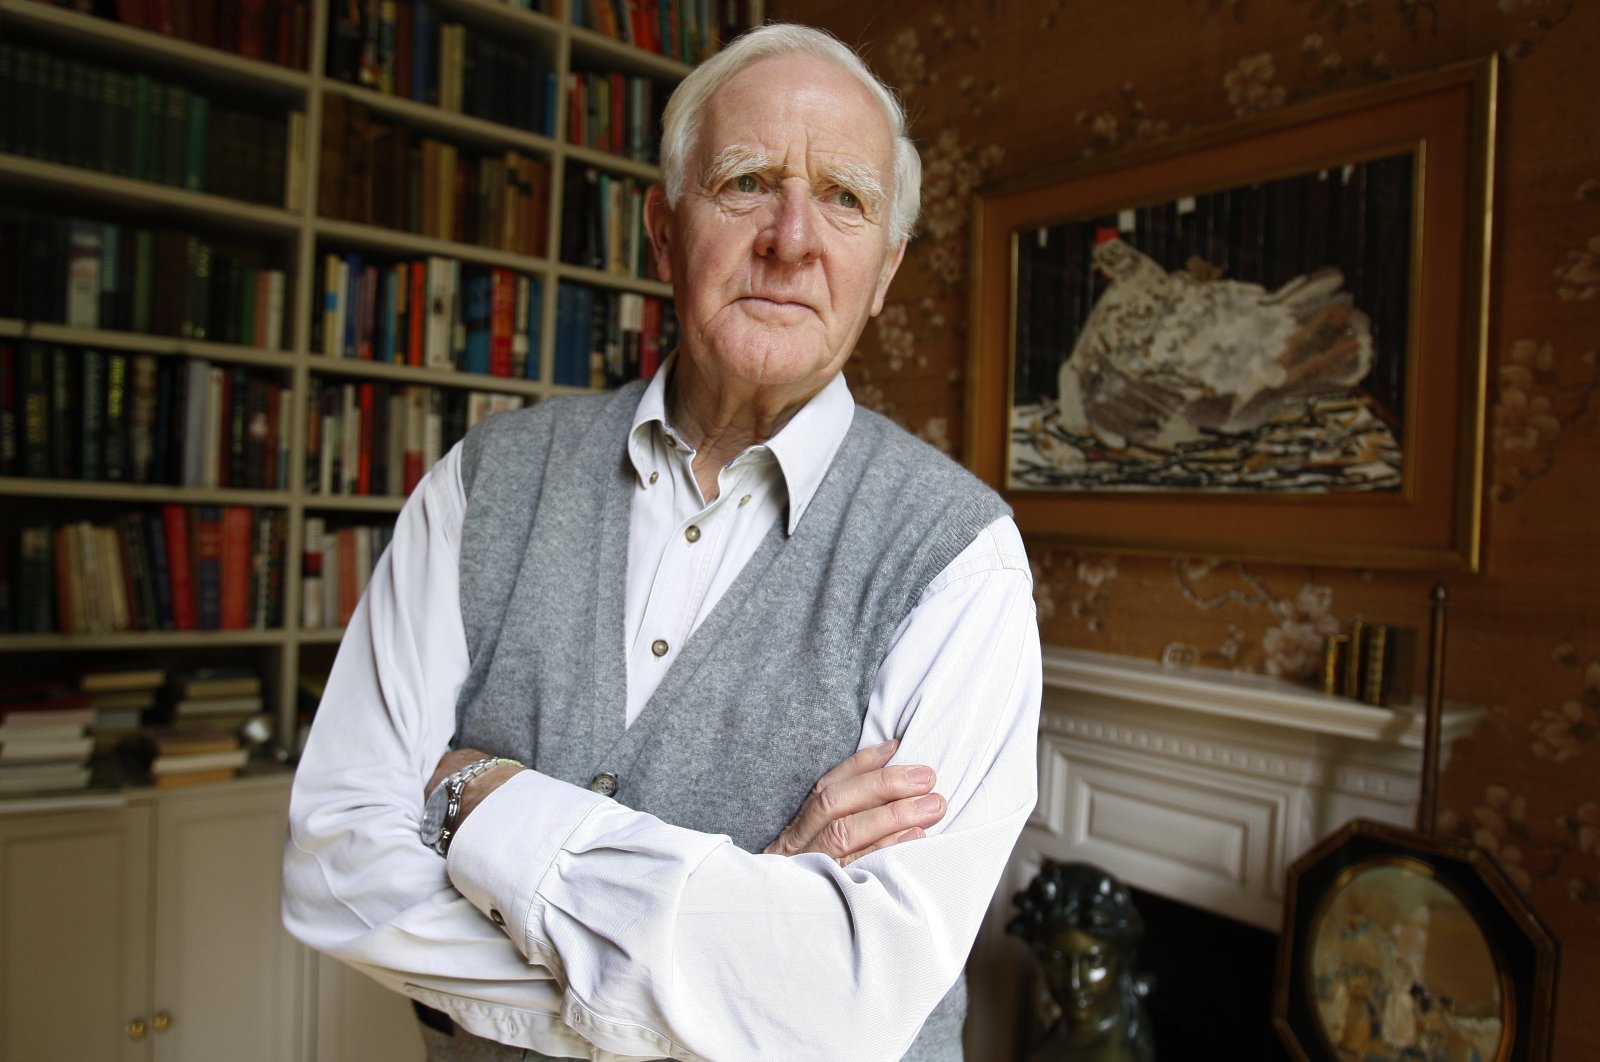 Author John Le Carre poses for a photo at his home in London, Aug. 28, 2008. (AP PHOTO)